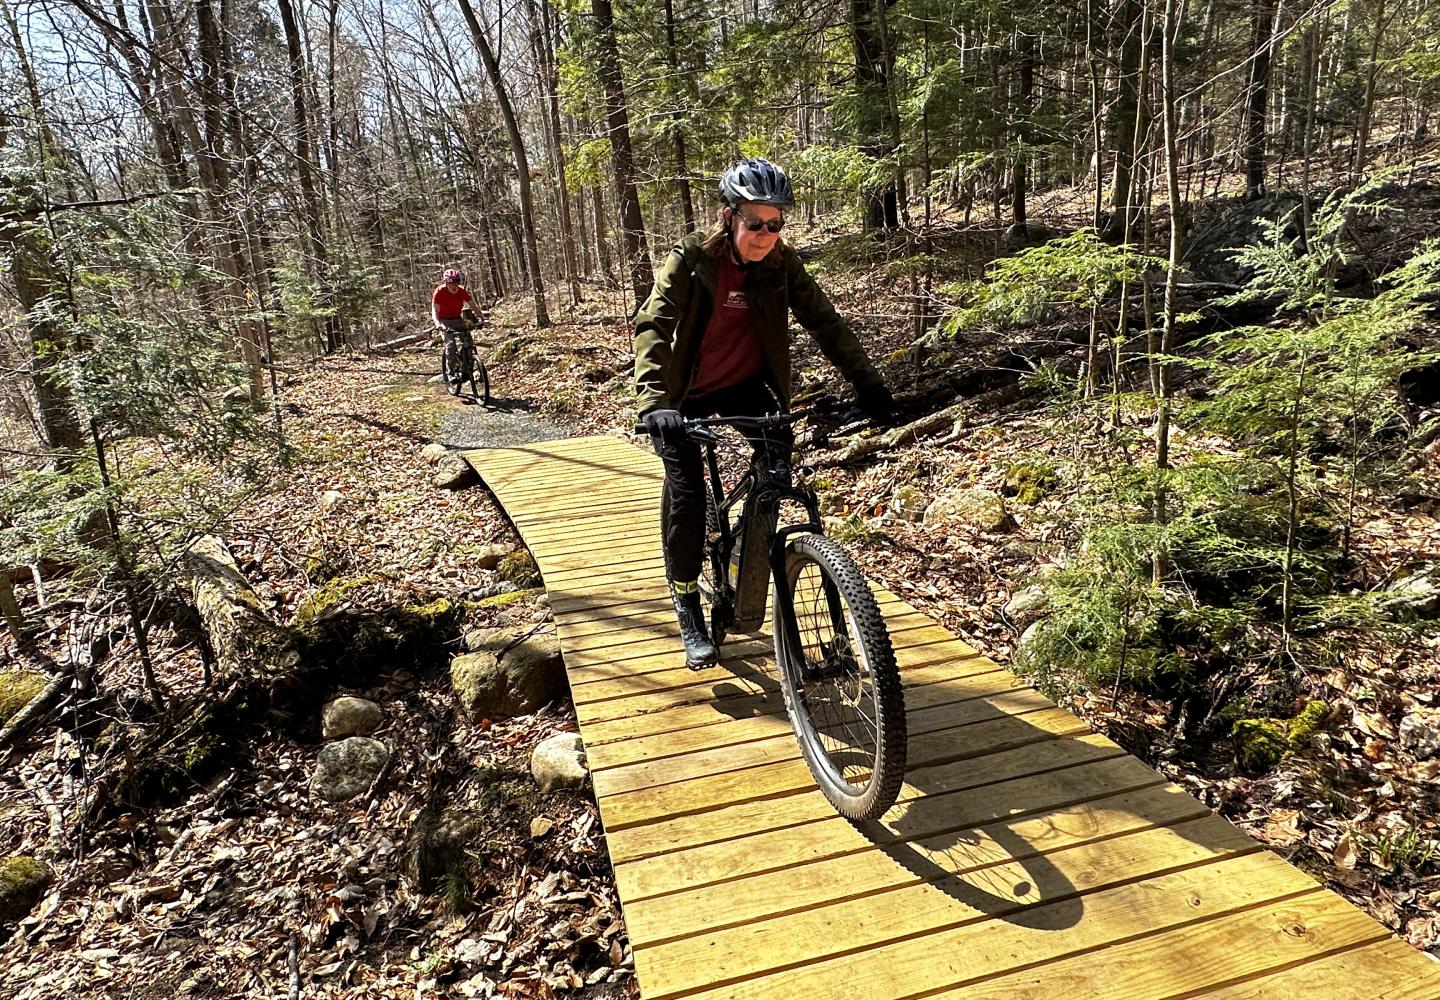 Mountain bikers found dry trails in mid-April at Cobble Hill in Elizabethtown.